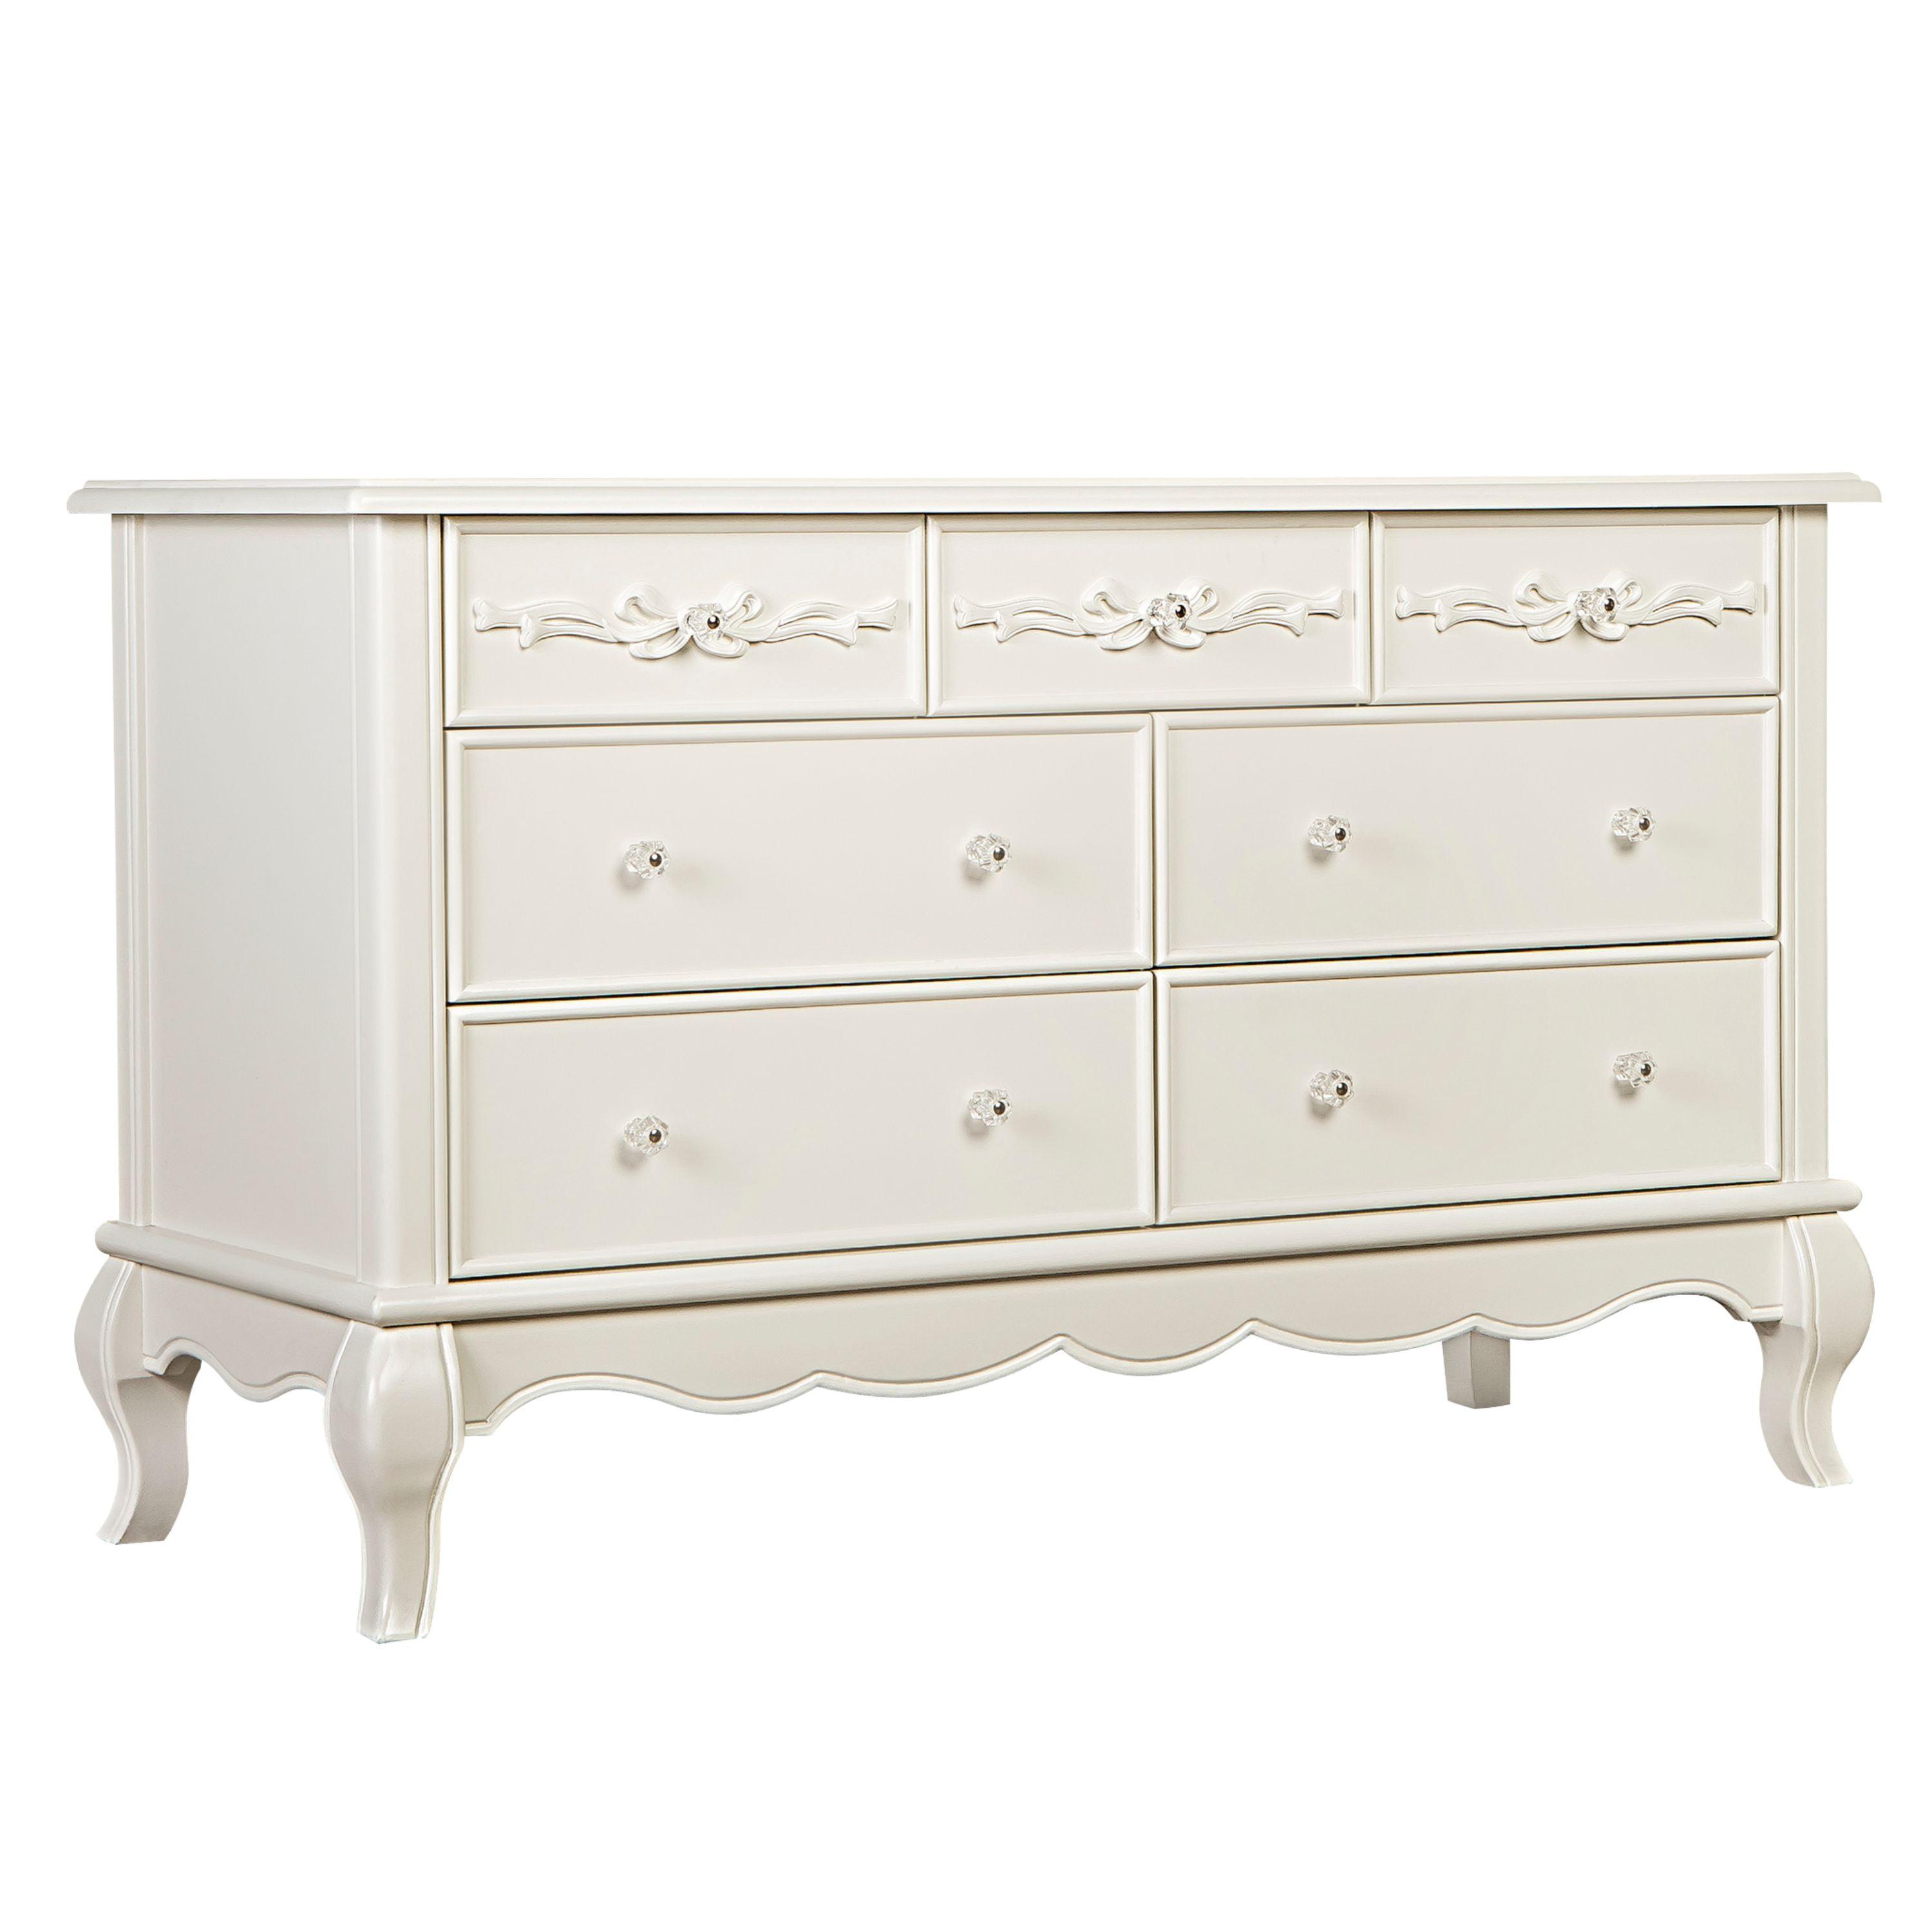 Enchanted Ivory Lace Double Dresser with Dovetail Drawers